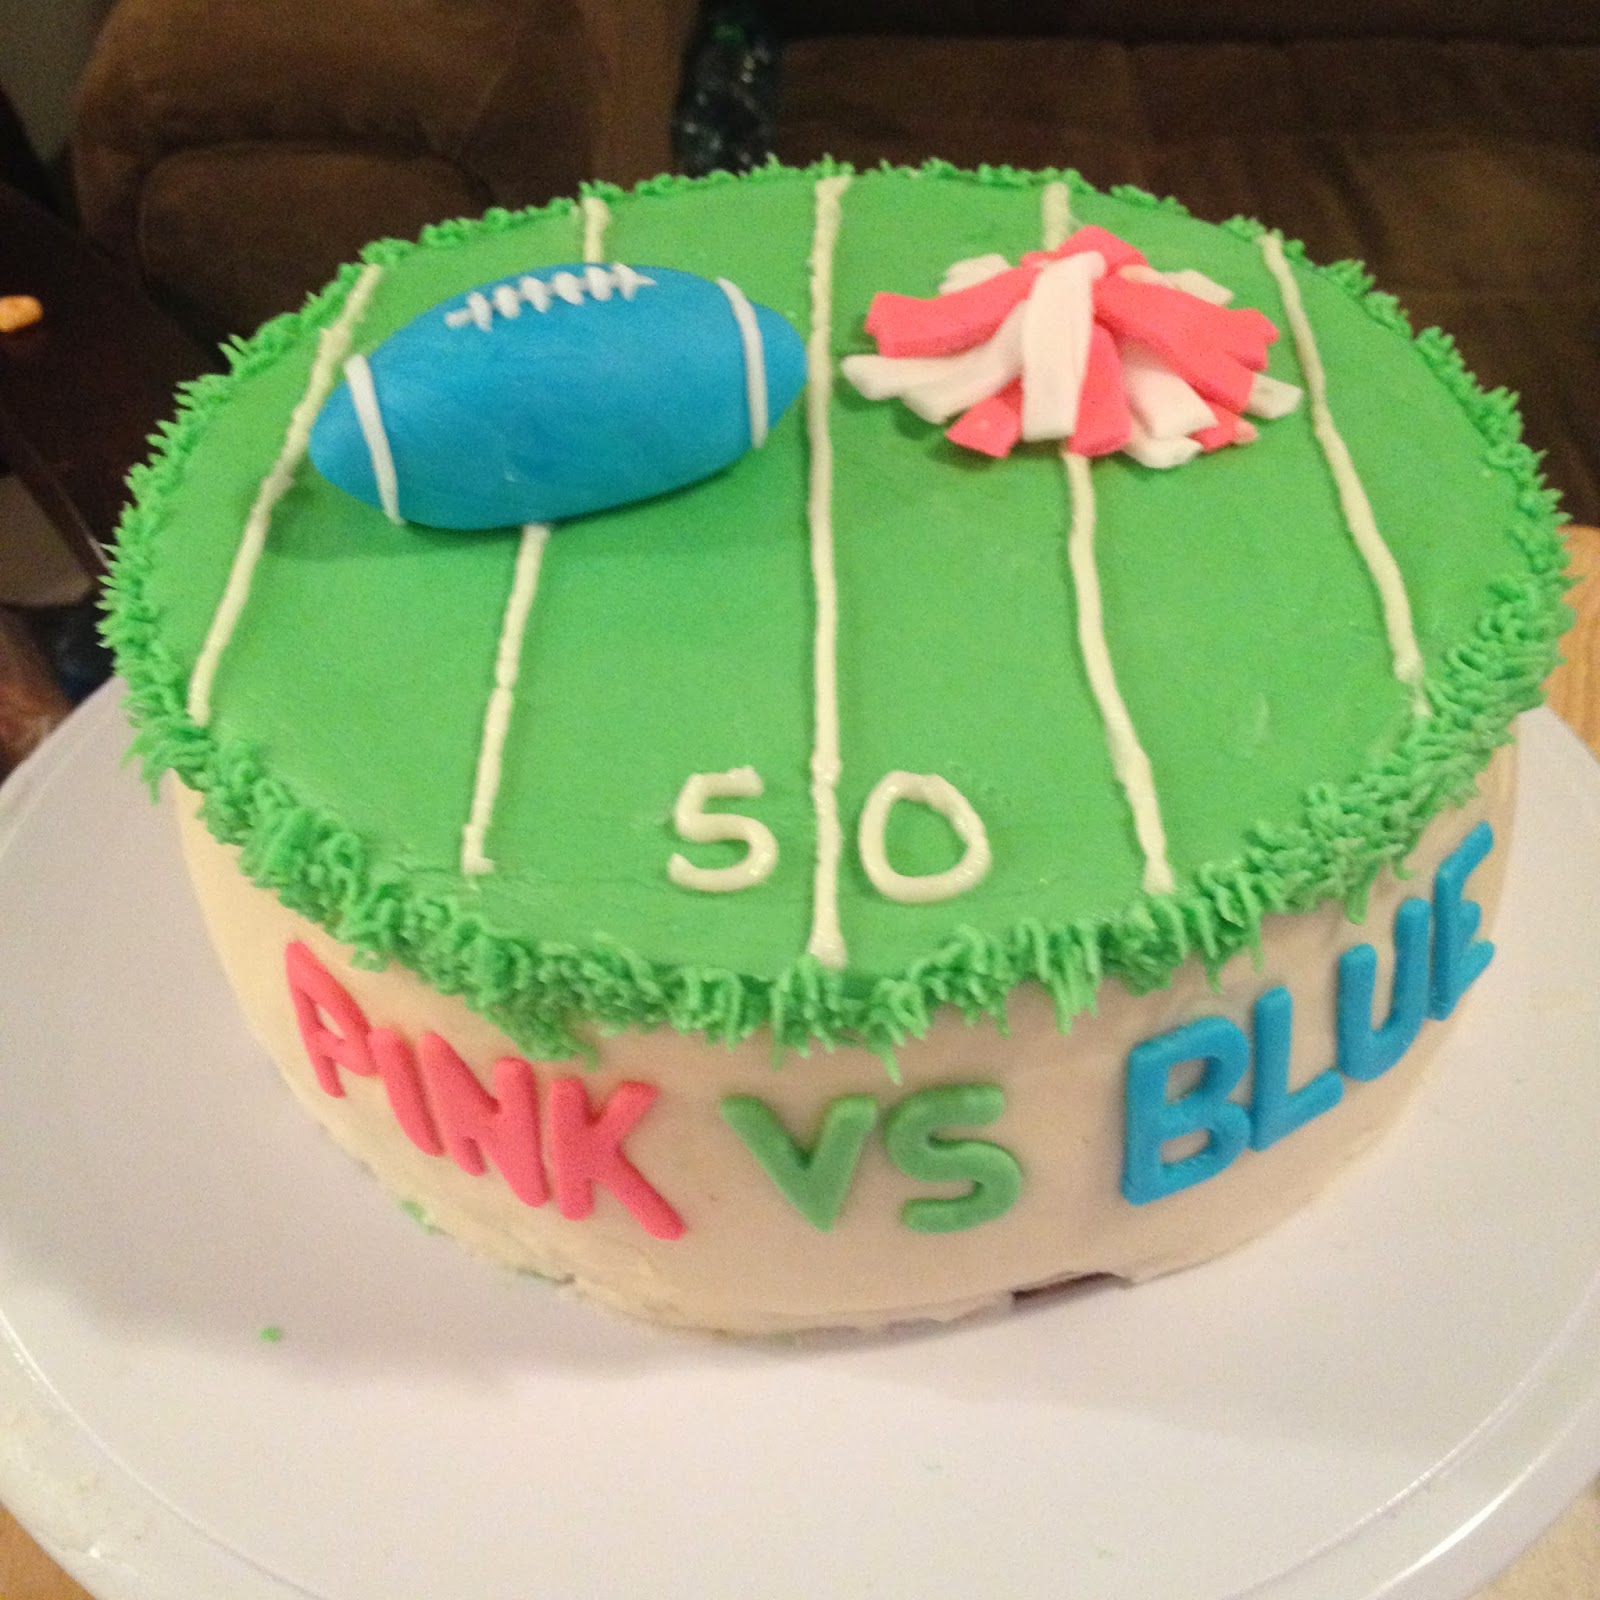 Pink vs Blue - Football Gender Reveal Party